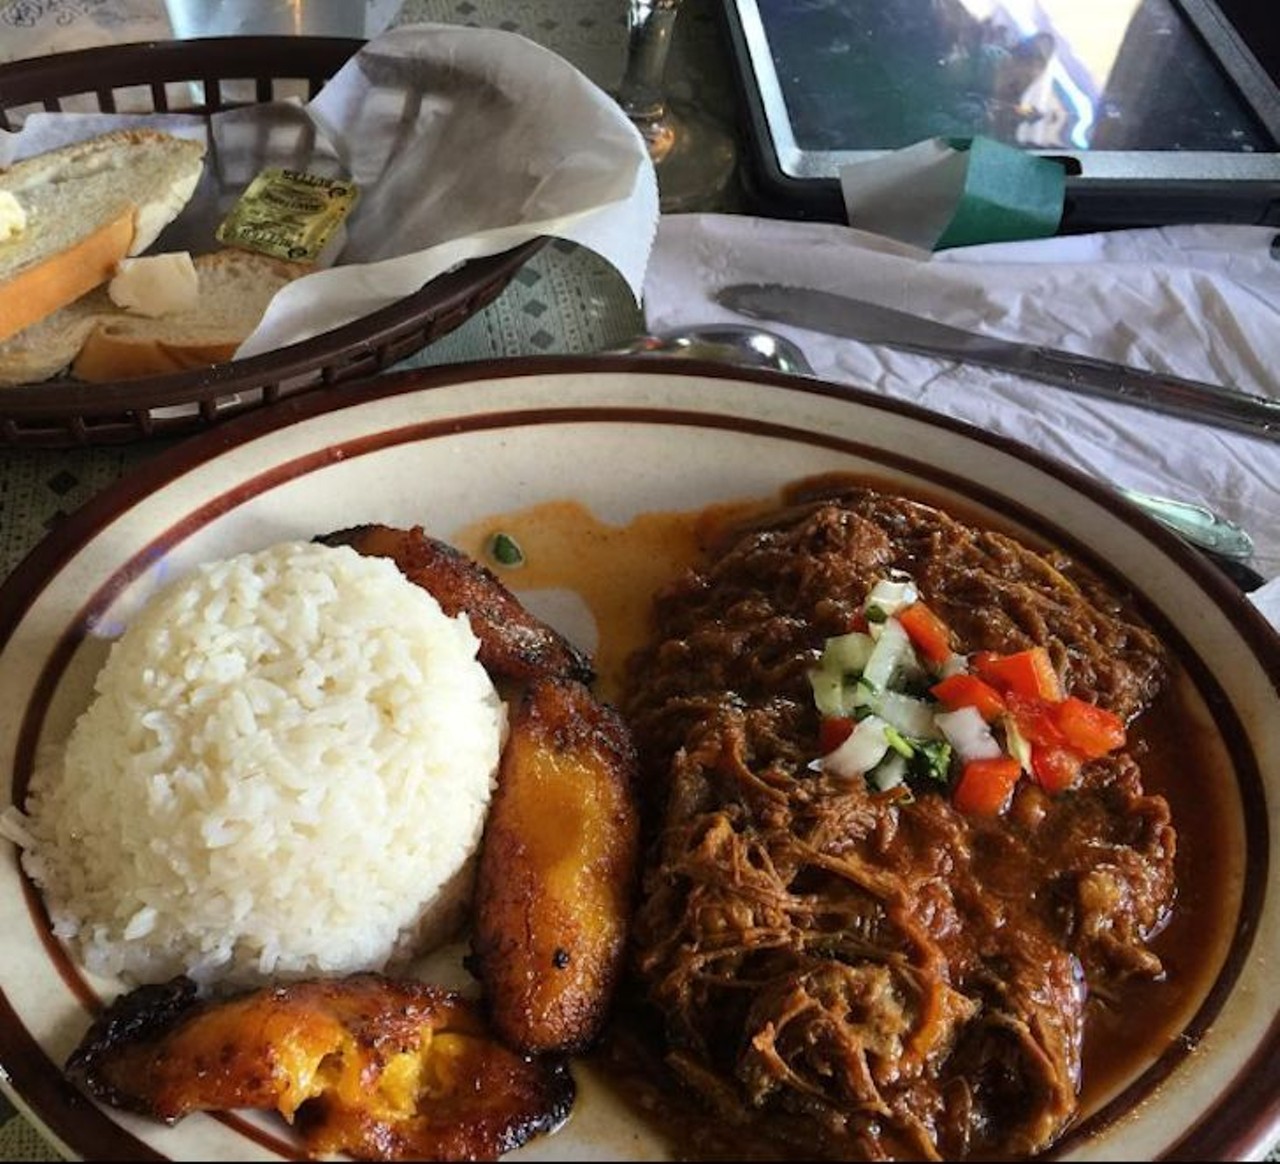 What we recommend: ropa vieja with rice and sweet plantains
One of the national dishes of Cuba, ropa vieja is made of shredded beef in a chili, tomato, onion and cumin sauce. The juices from the sauce elevate the already savory beef, and the sweet plantains offset the salty tang.
Photo via msadrianaperez/Instagram